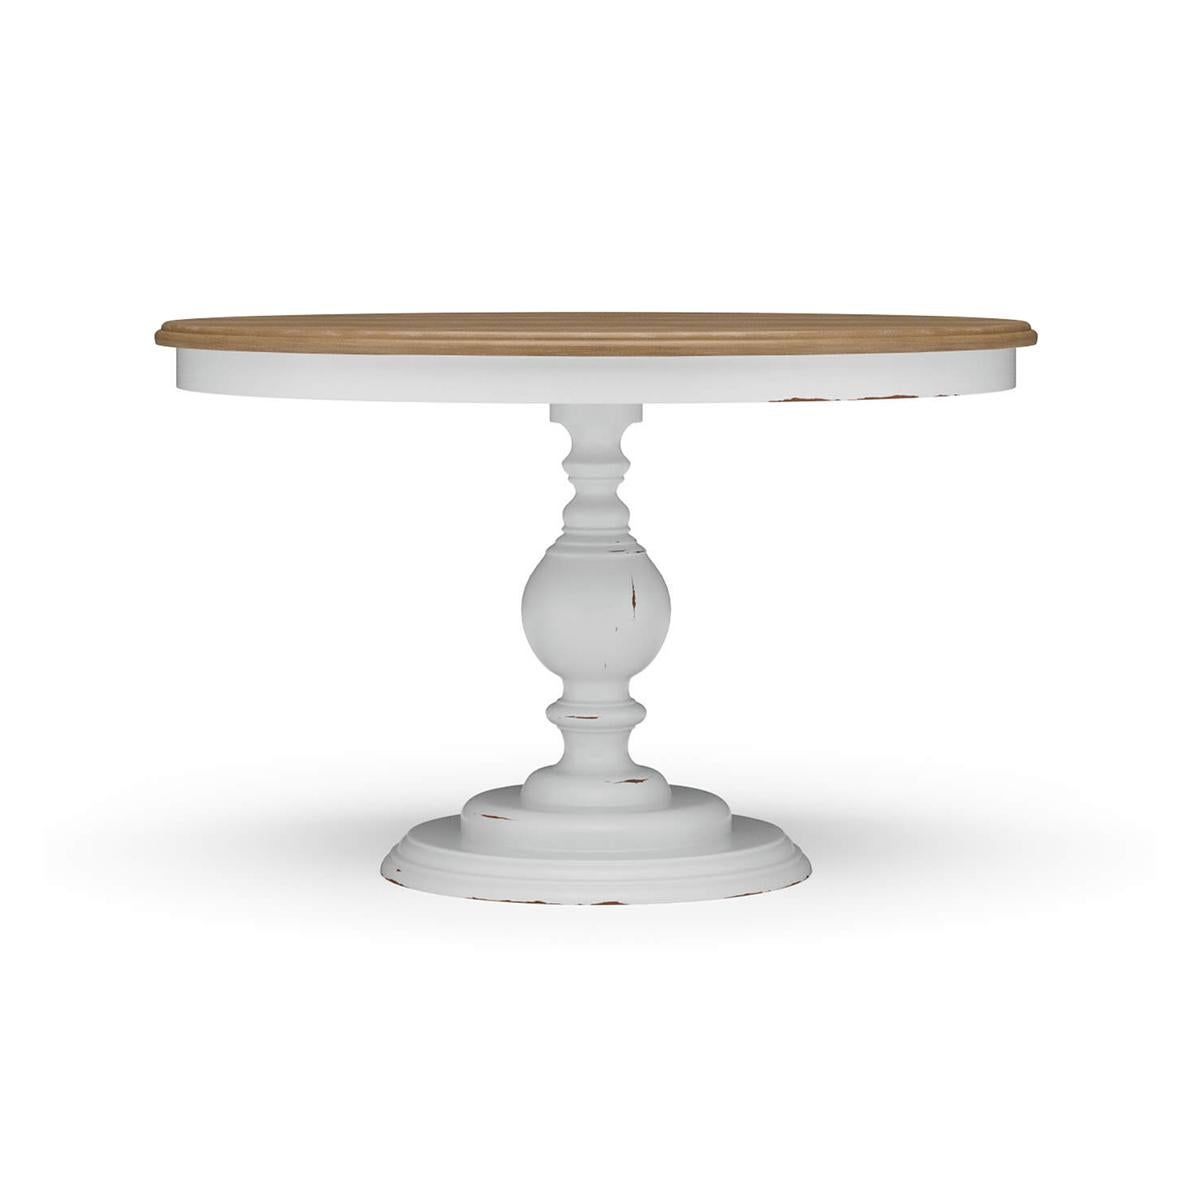 French Provincial Custom Painted Provincial Dining Table - 48 For Sale